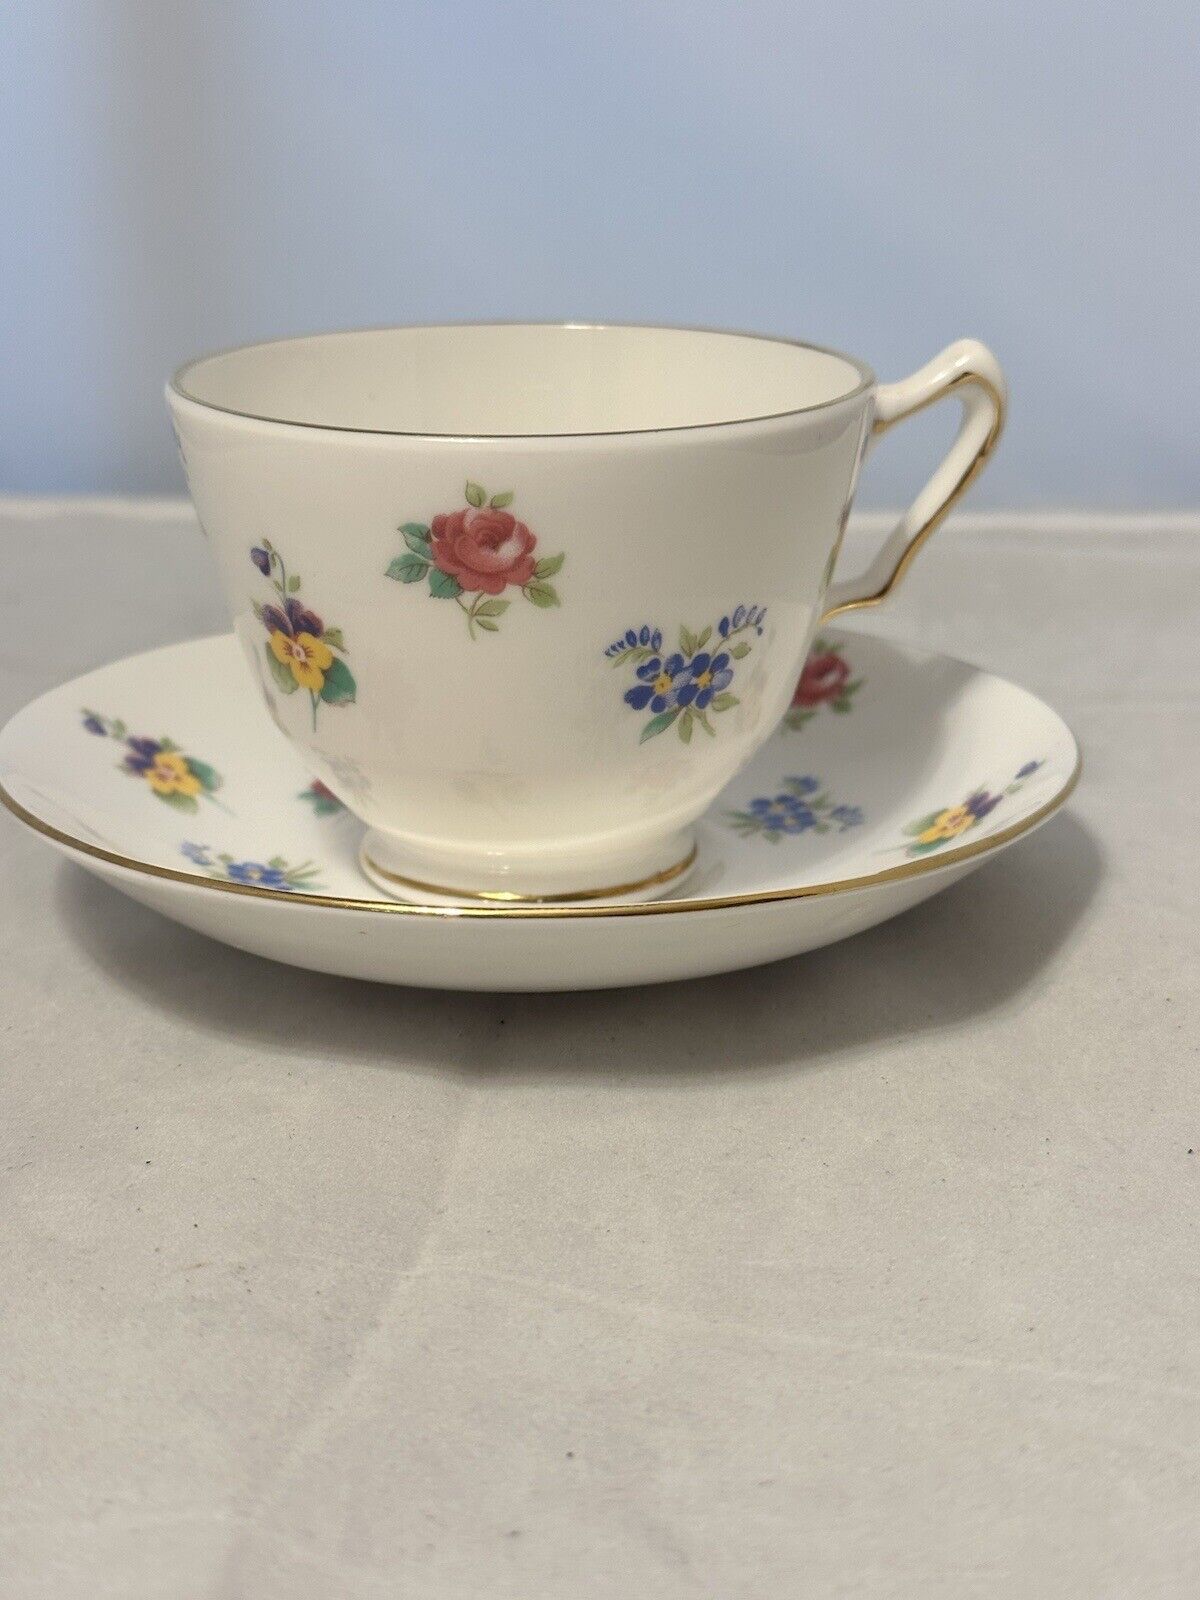 Crown Staffordshire Bone China Floral Tea Cup & Saucer Mothers Day Gift